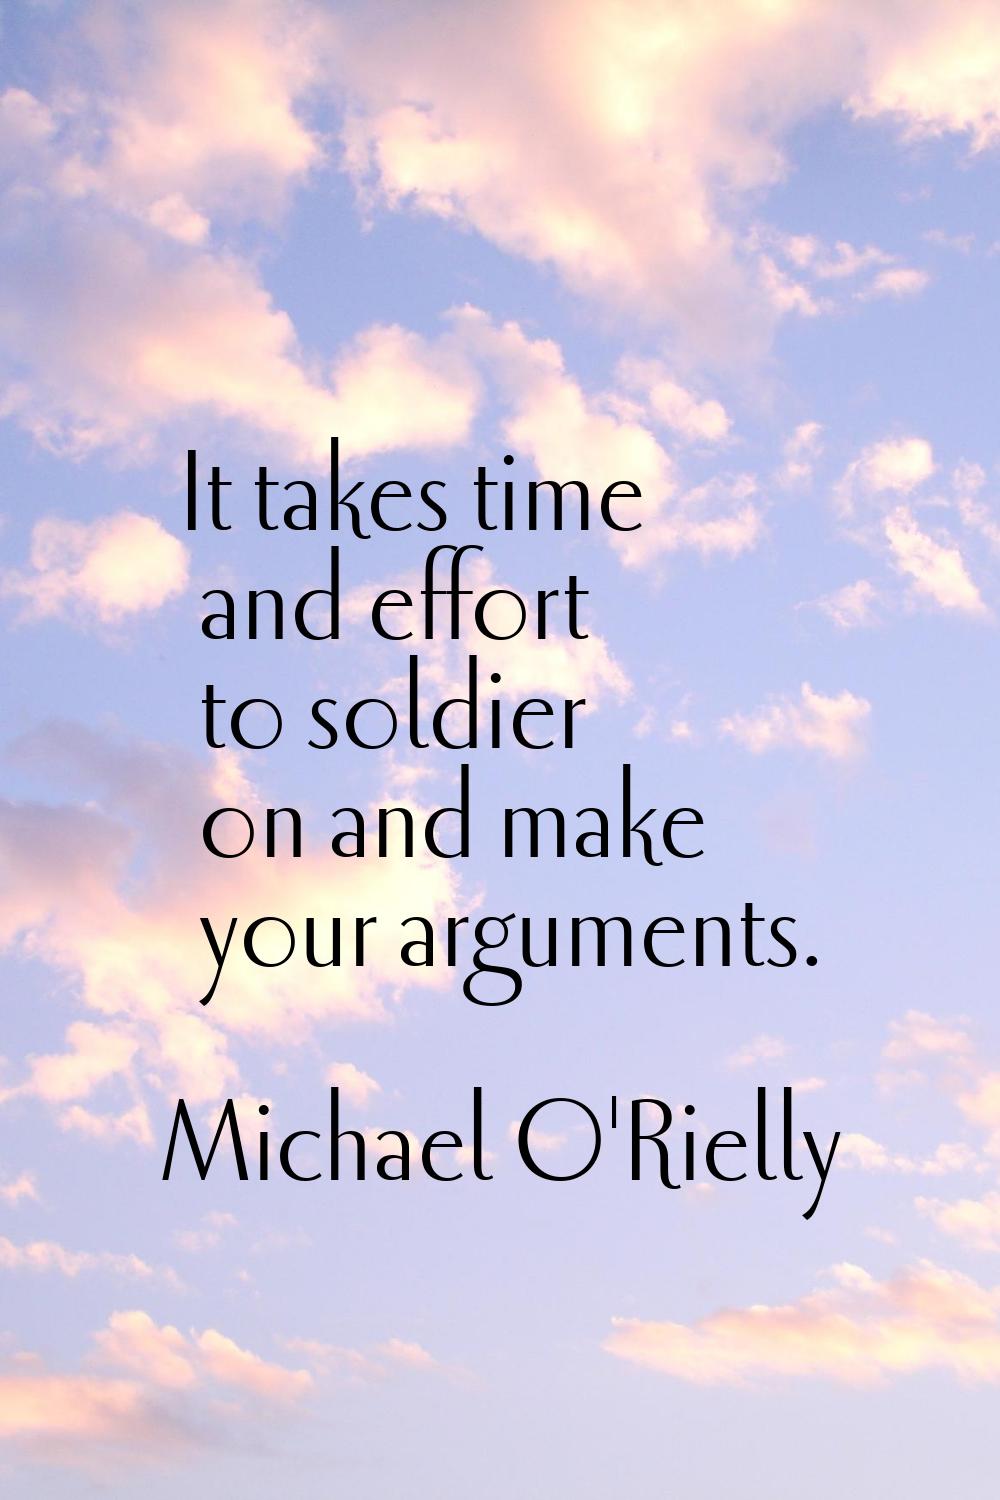 It takes time and effort to soldier on and make your arguments.